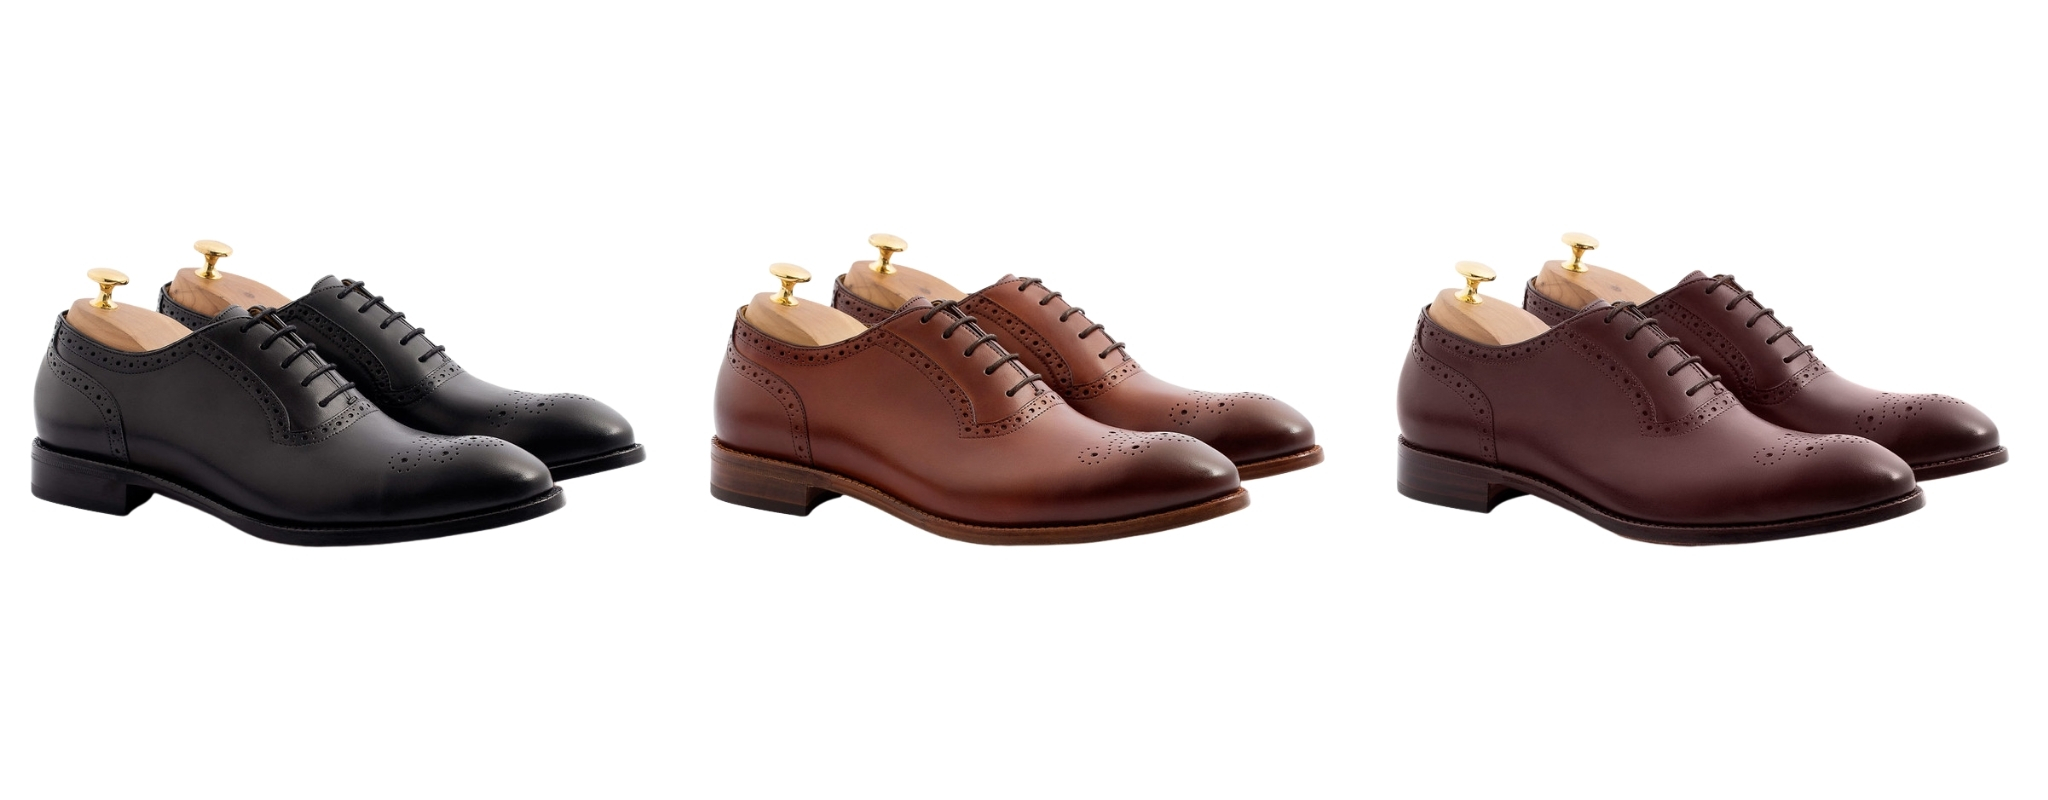 black, brown and burgundy dress shoes